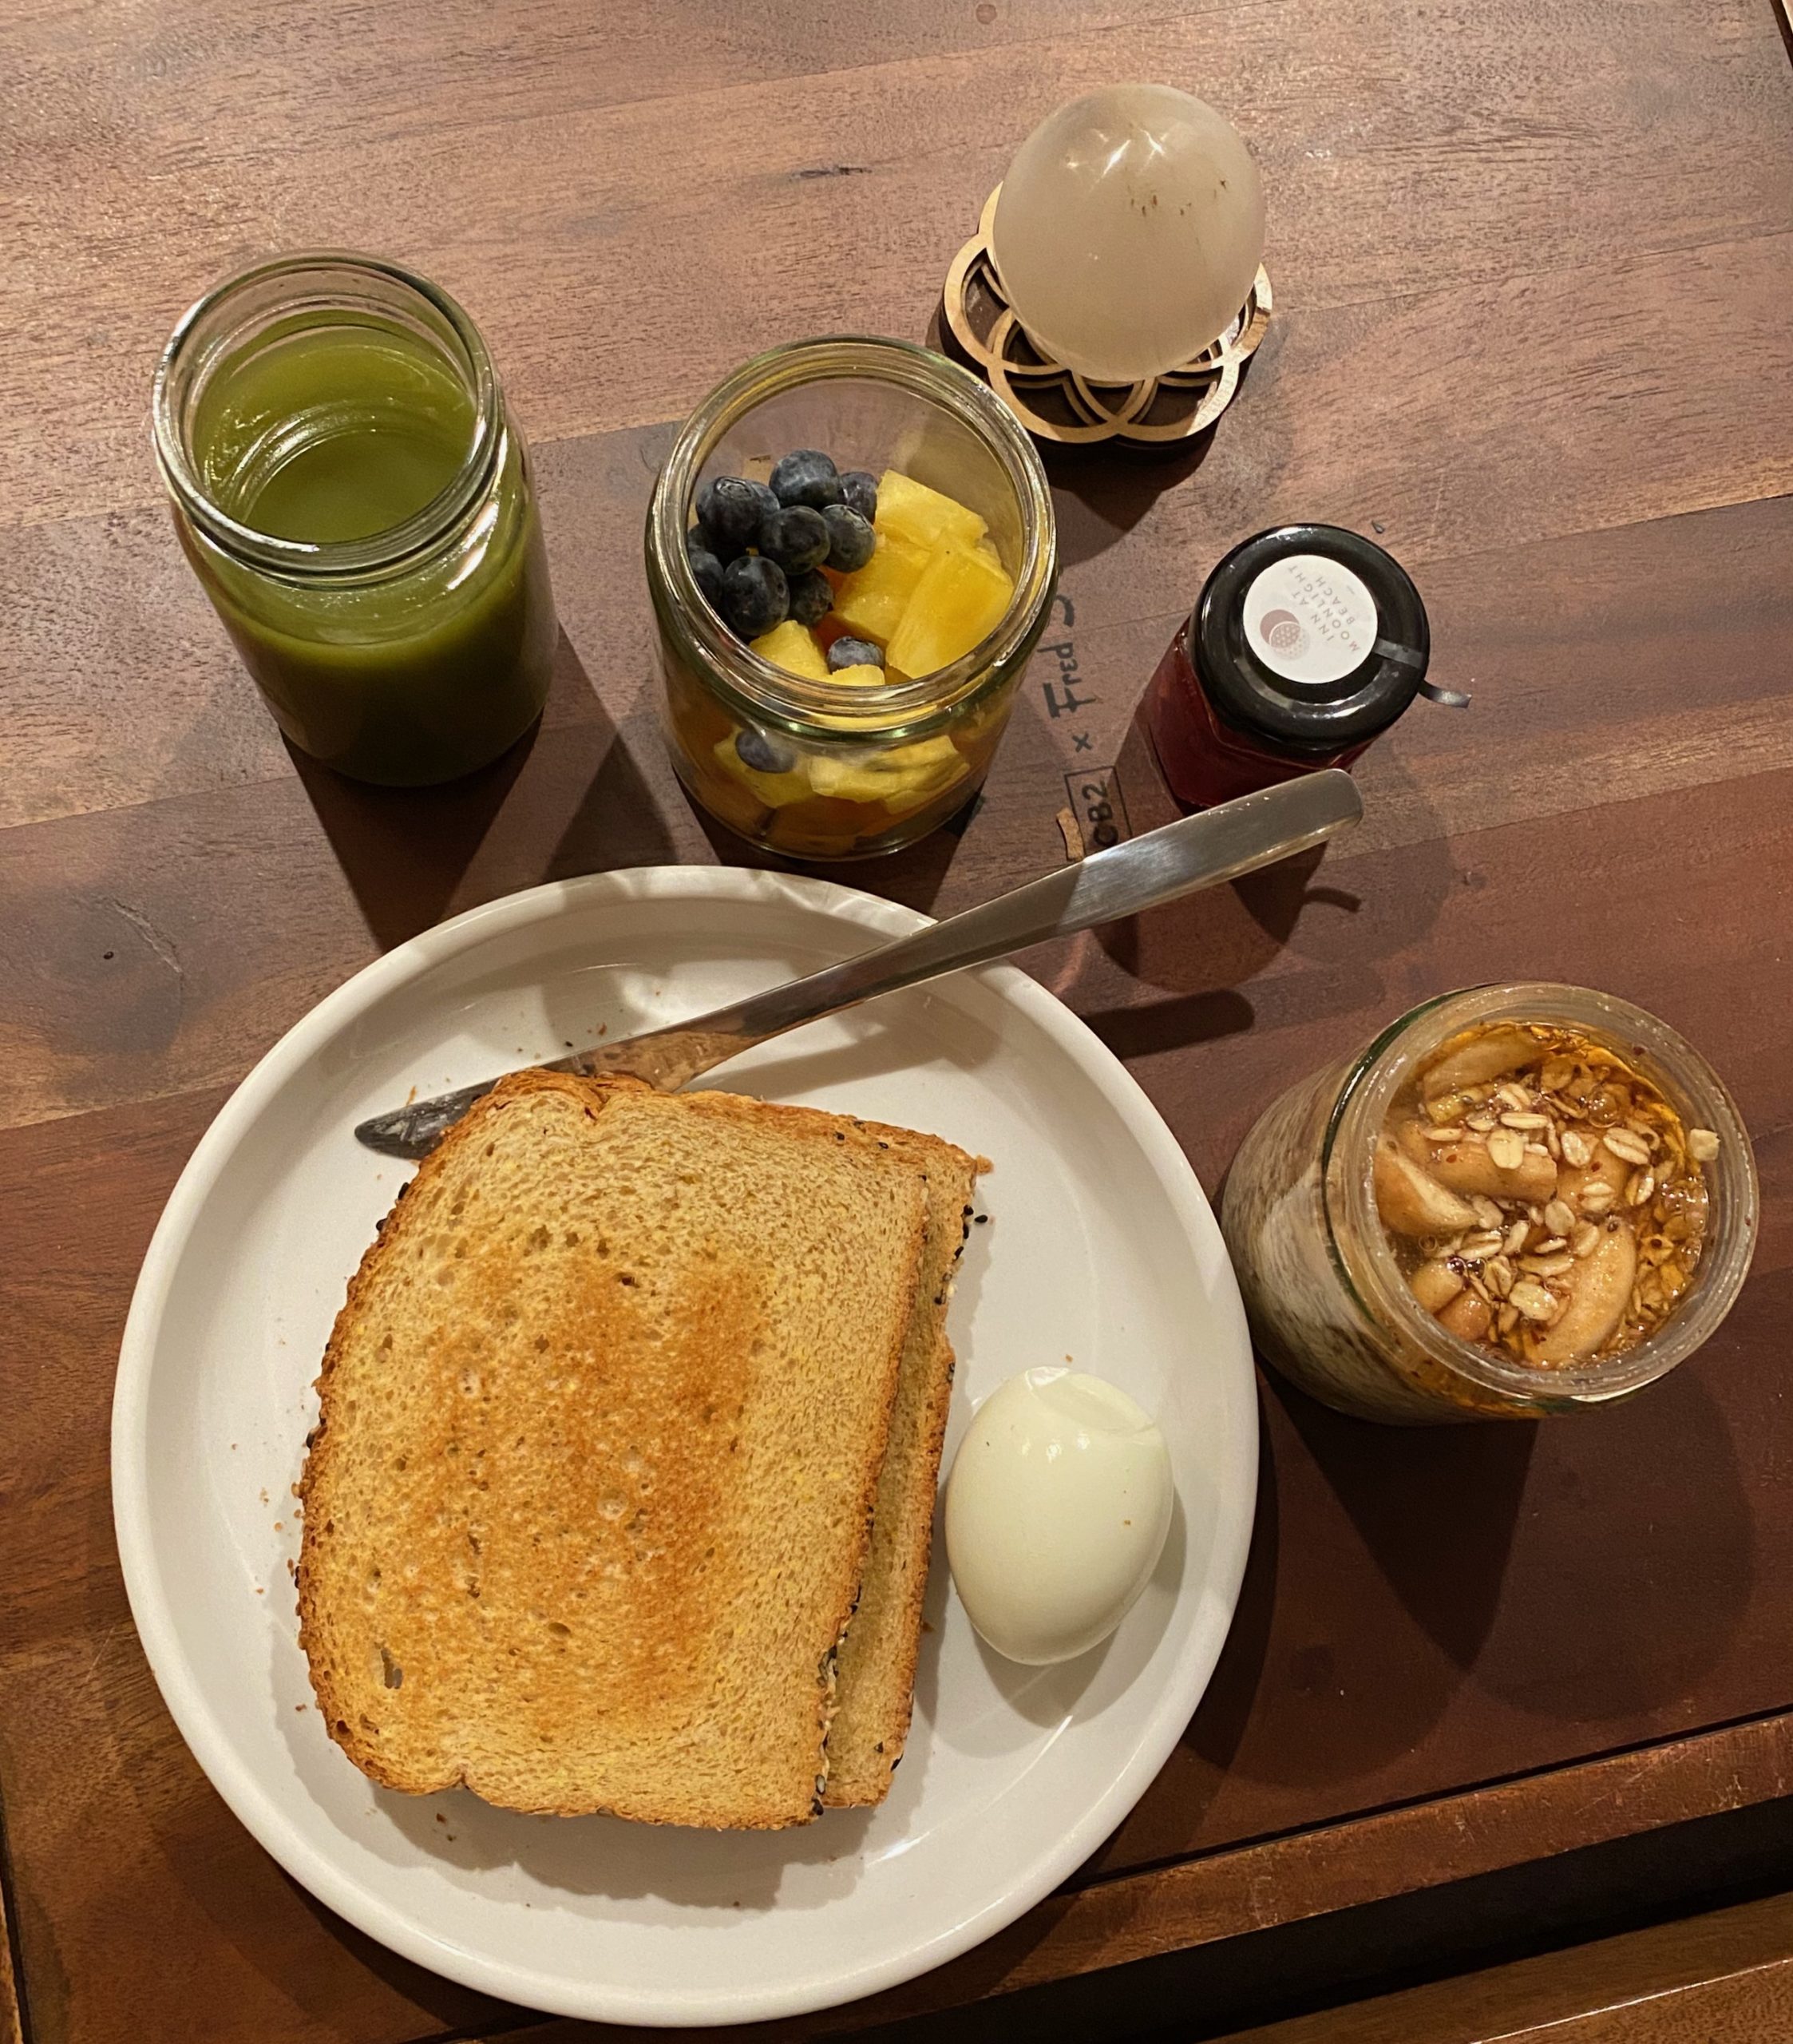 Locally Sourceed Breakfast at the Inn at Moonlight Beach at Encinitas, CA: Green juice, Whole-grain toast,egg, fresh fruit, overnight oats with apples andhoney and apple jelly